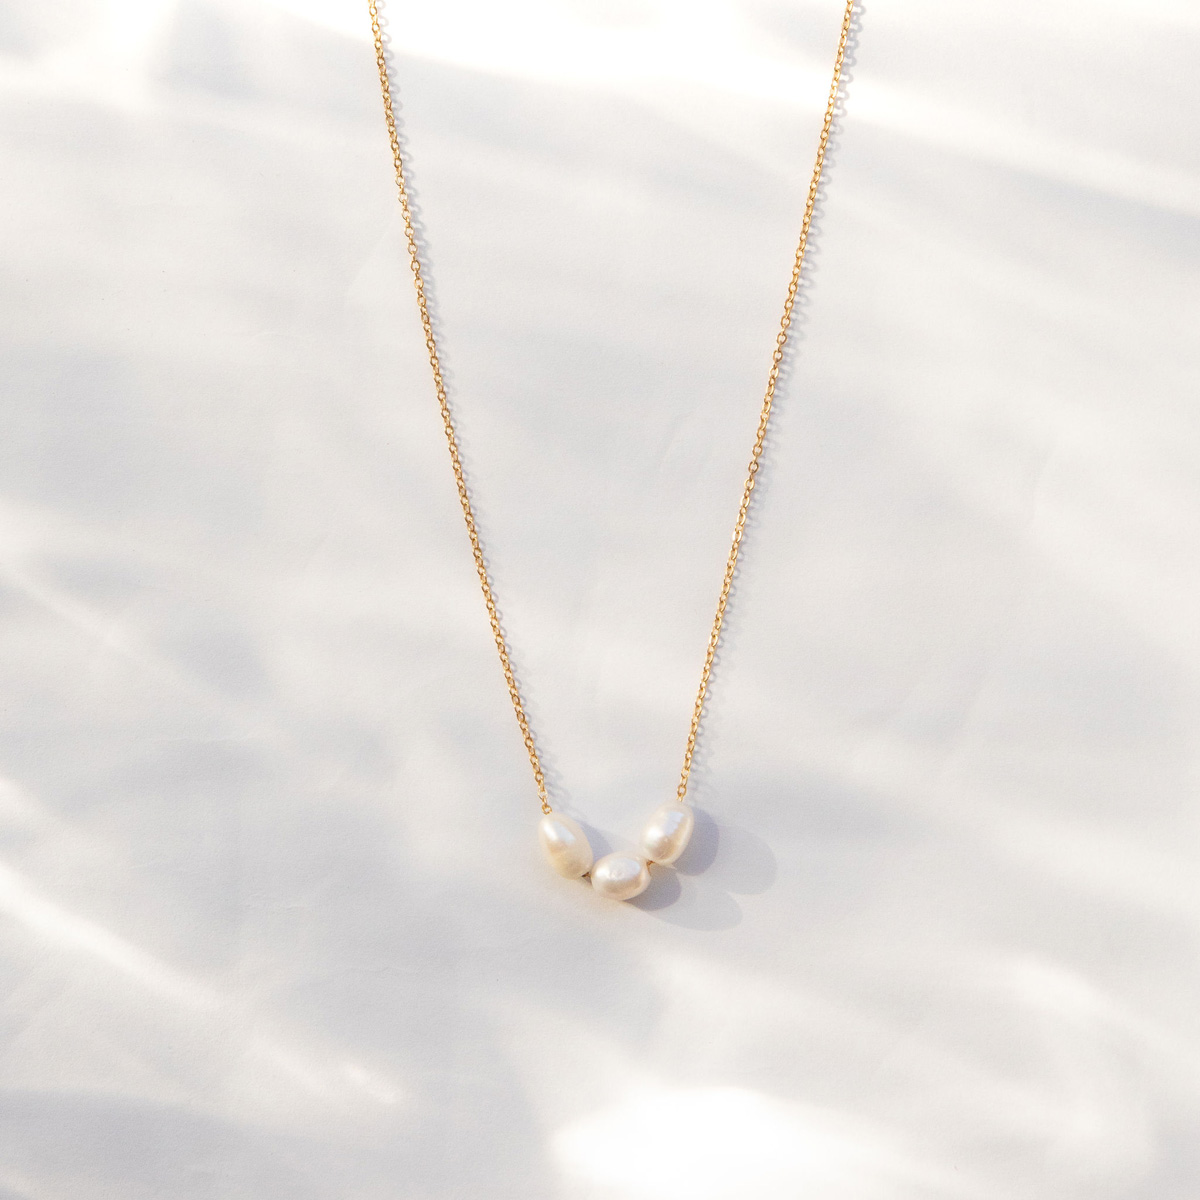 The Cloud Cluster Necklace, a trio of ringed oval pearls on a dainty gold tone cable.